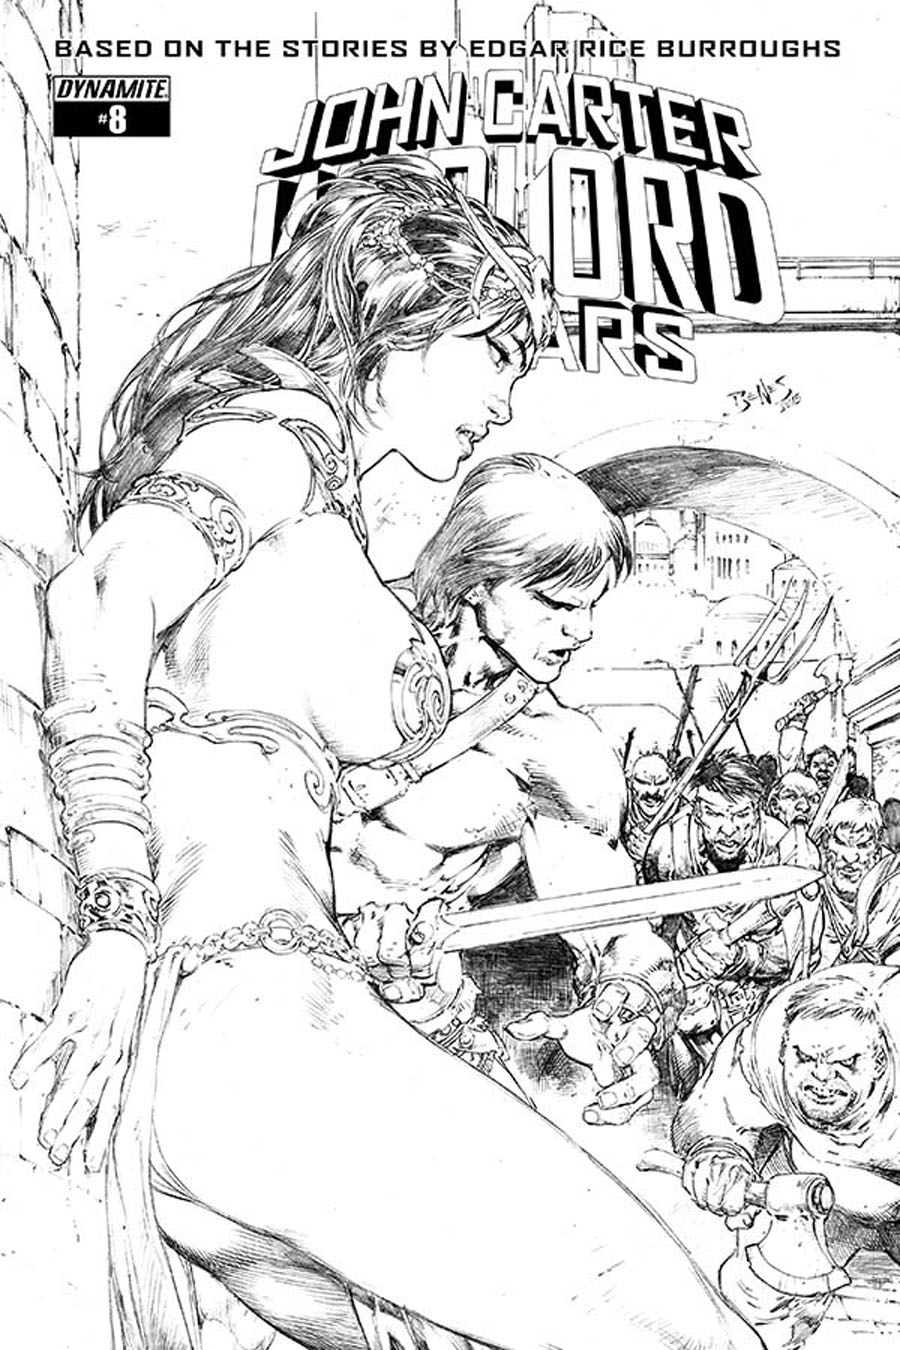 John Carter Warlord Of Mars Vol 2 #8 Cover F Incentive Ed Benes Black & White Cover